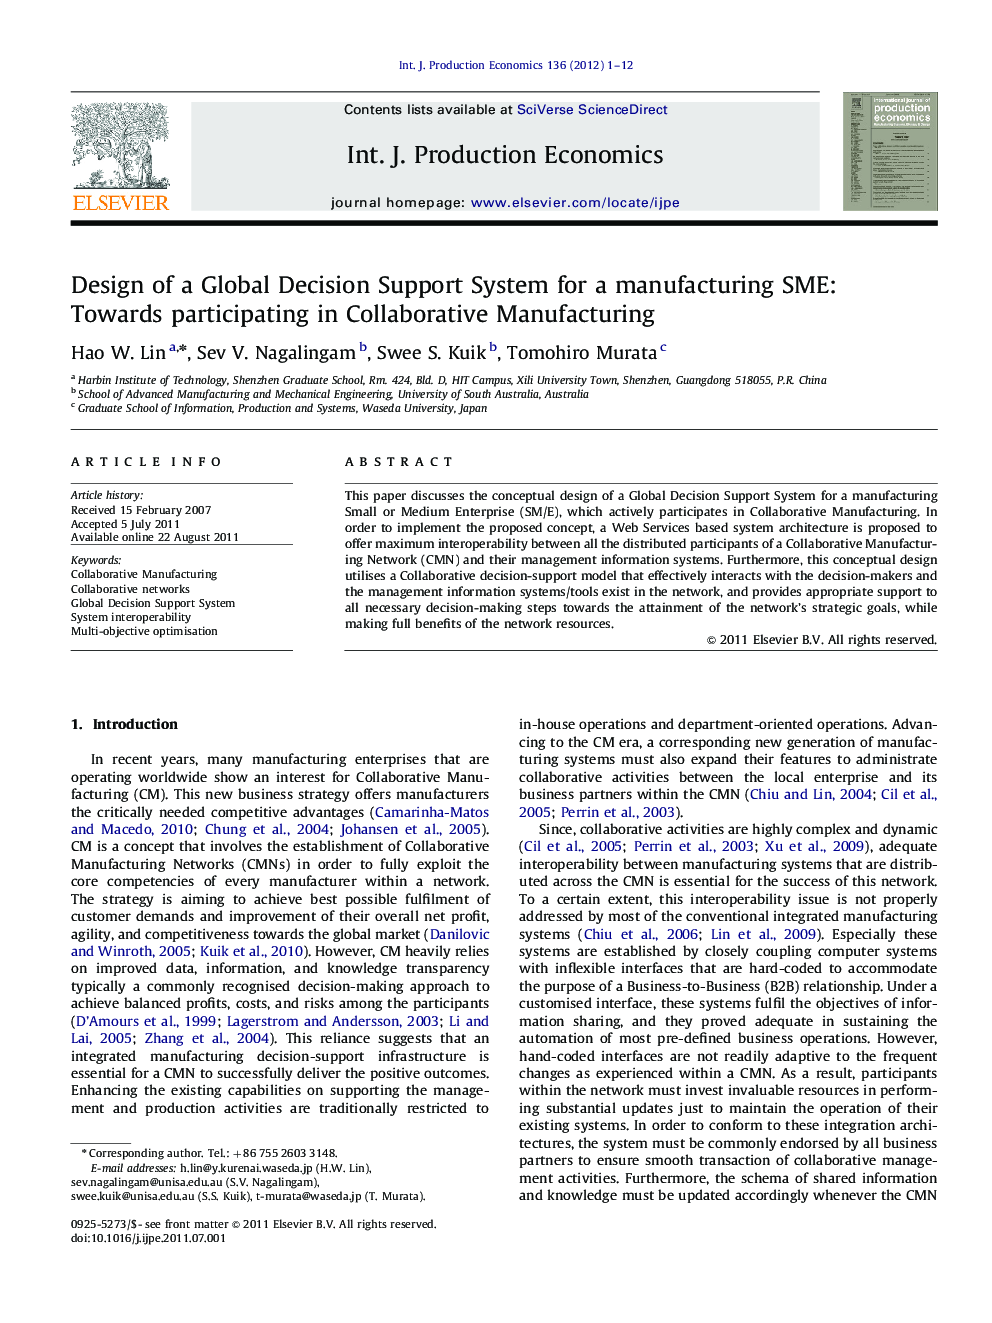 Design of a Global Decision Support System for a manufacturing SME: Towards participating in Collaborative Manufacturing